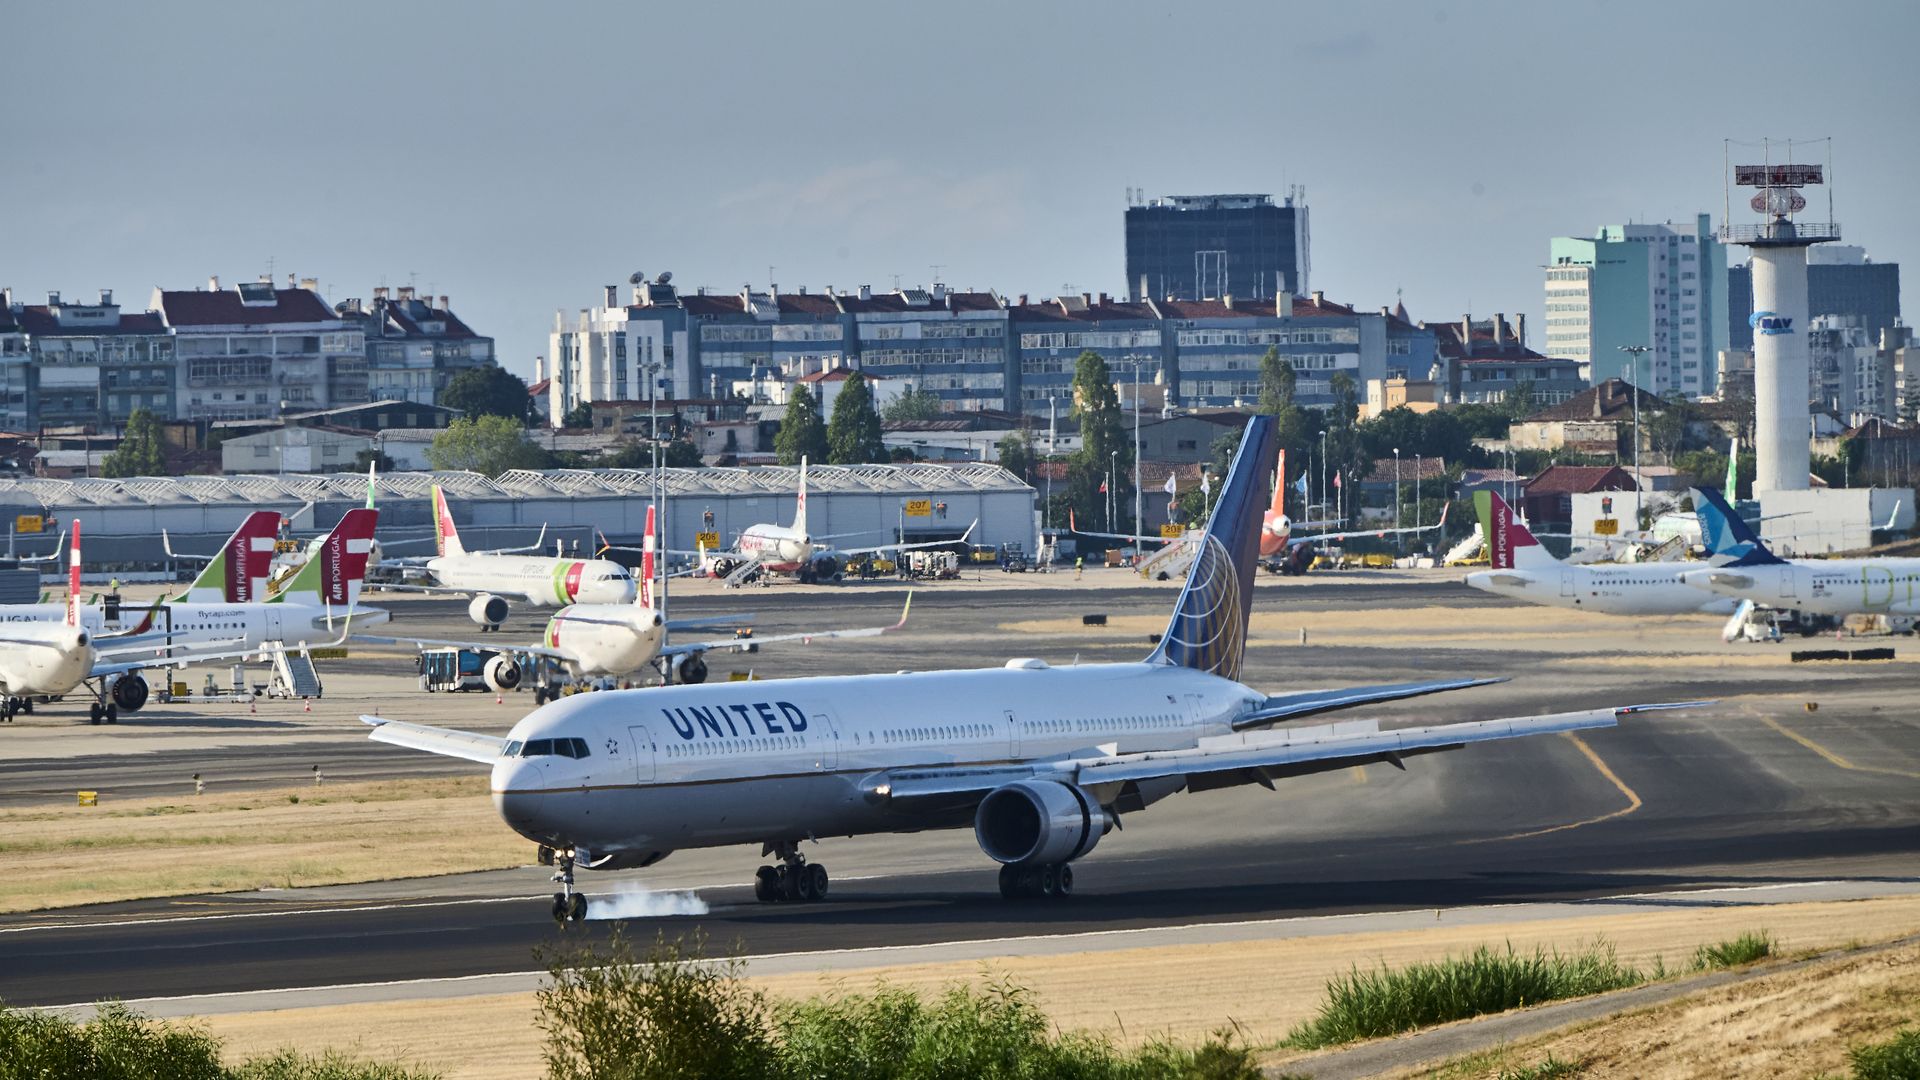 A United Airlines plane landing in Lisbon